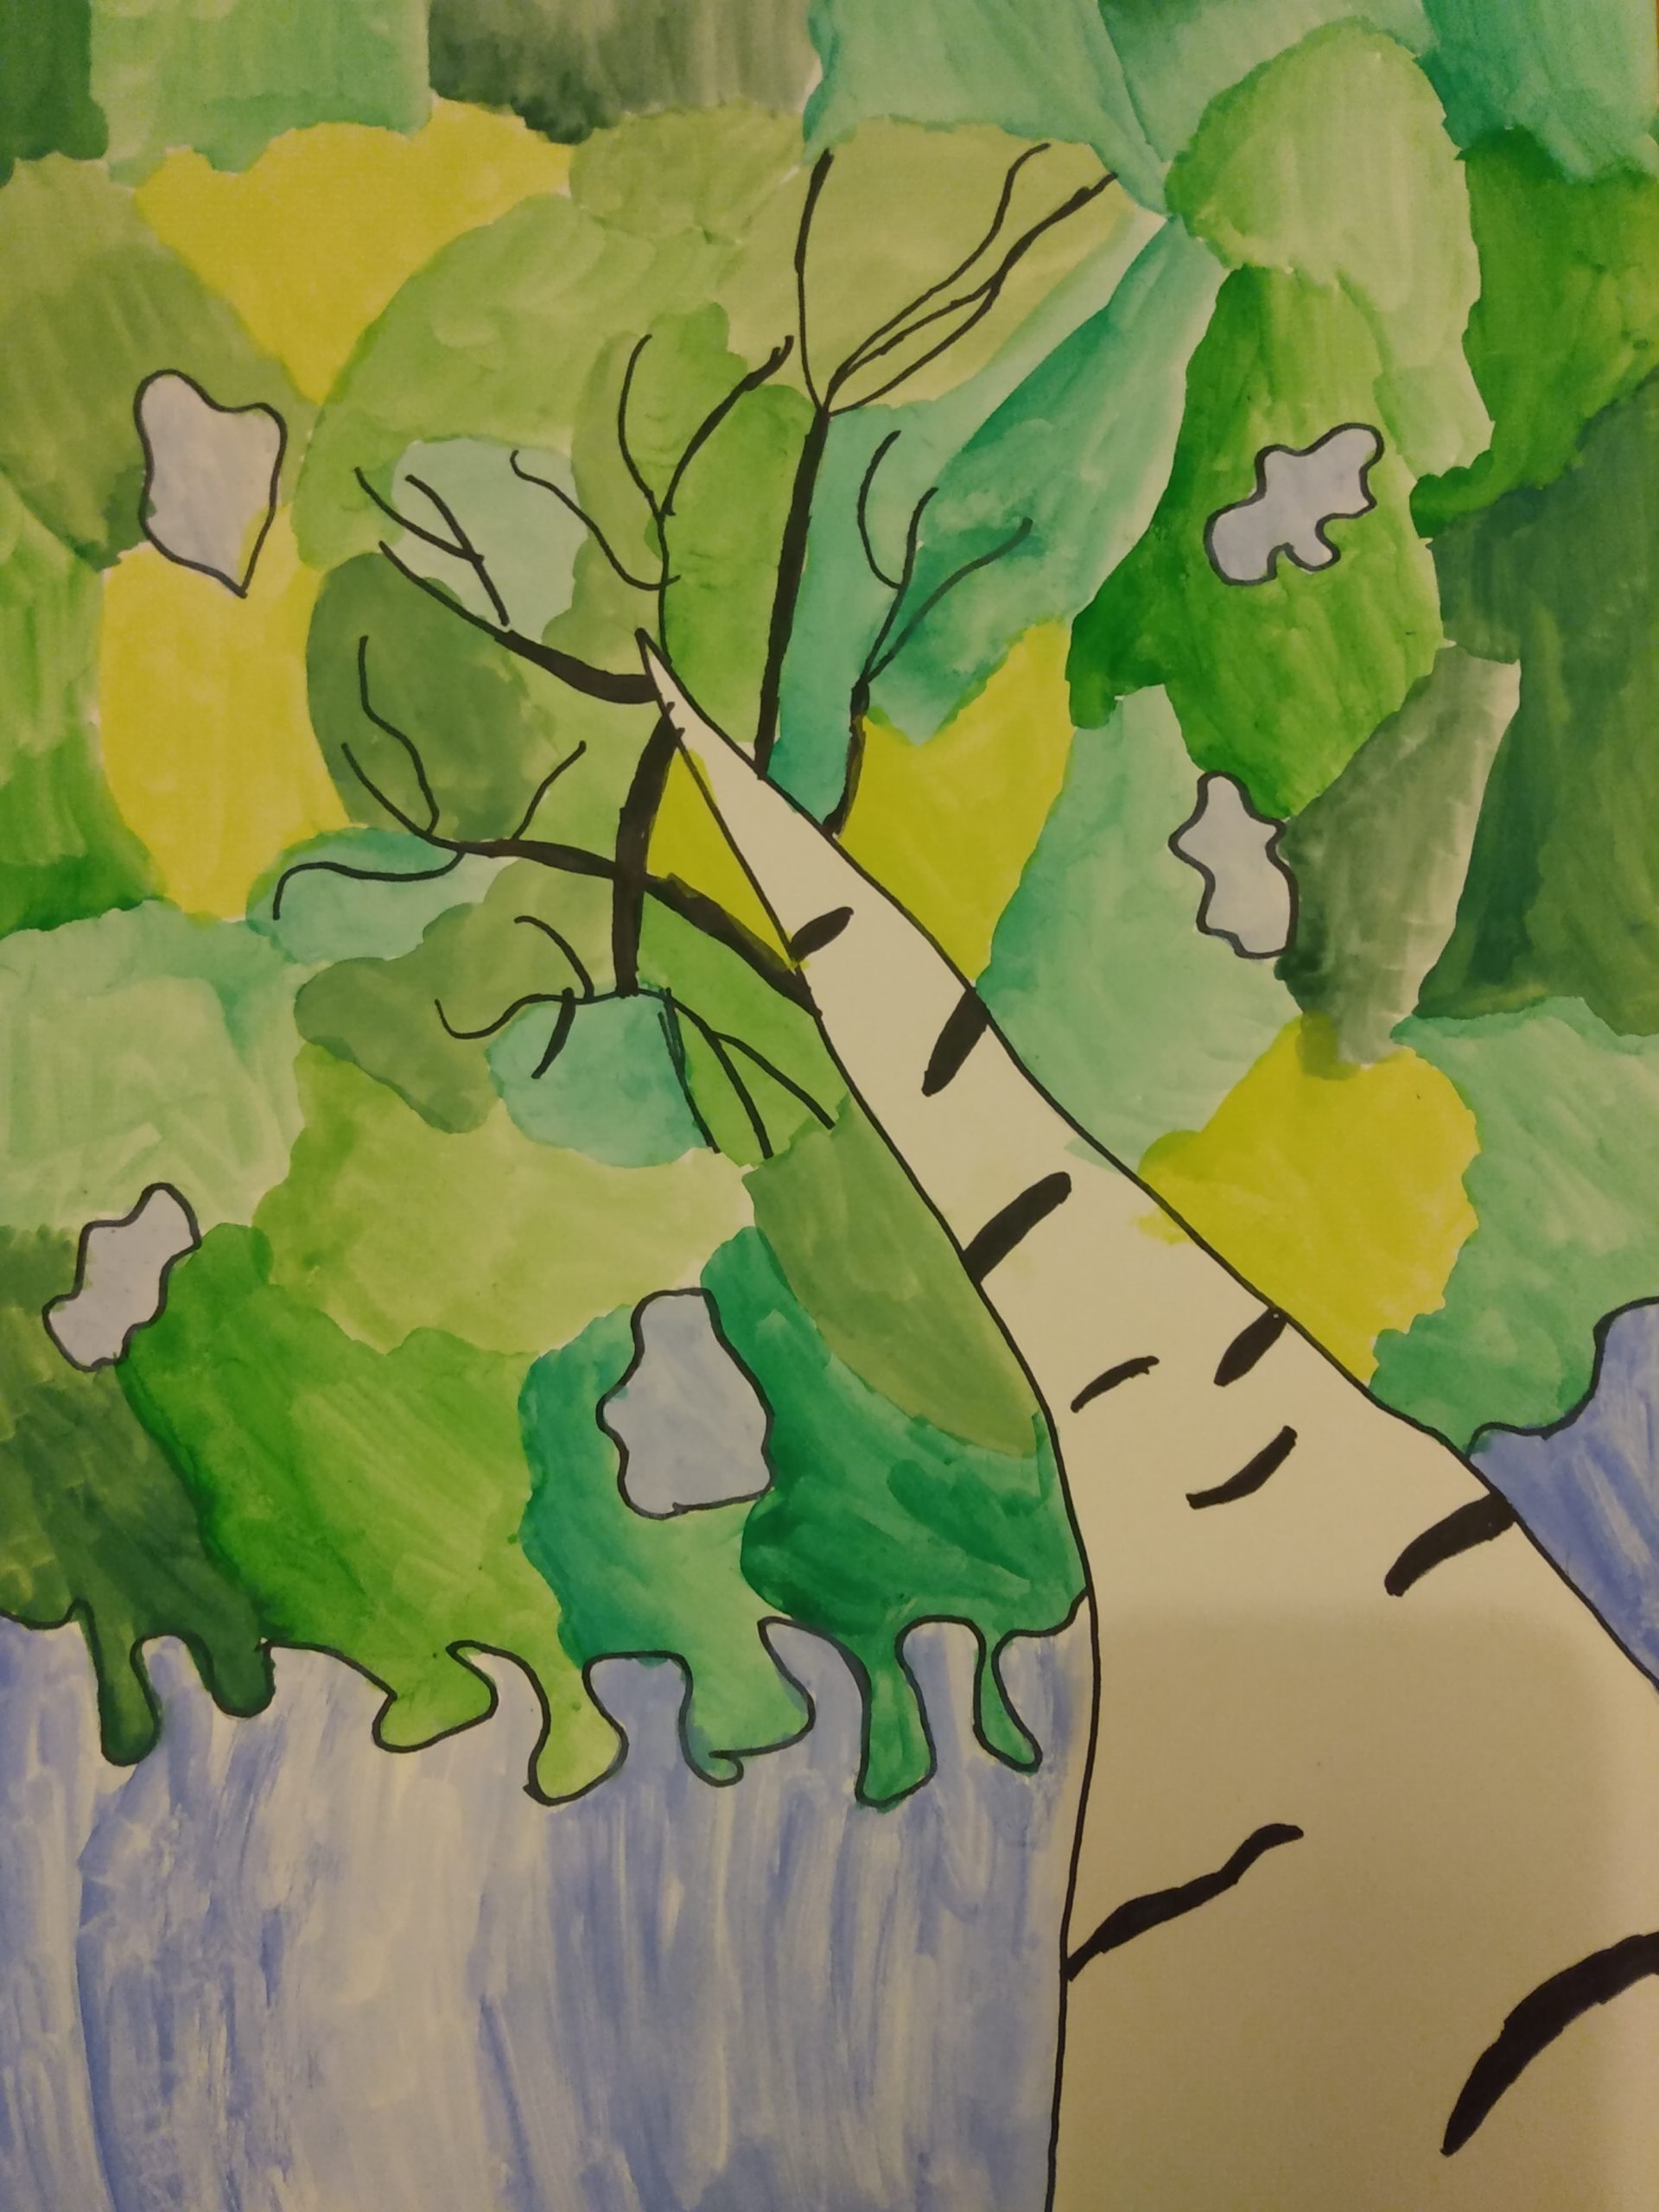 A drawing which situates the viewer at the bottom of a tall tree, looking up. From the small black lines on the beige trunk, it could be a birch tree. The leafy part of the tree covers many different shades of green and the background is blue and white.